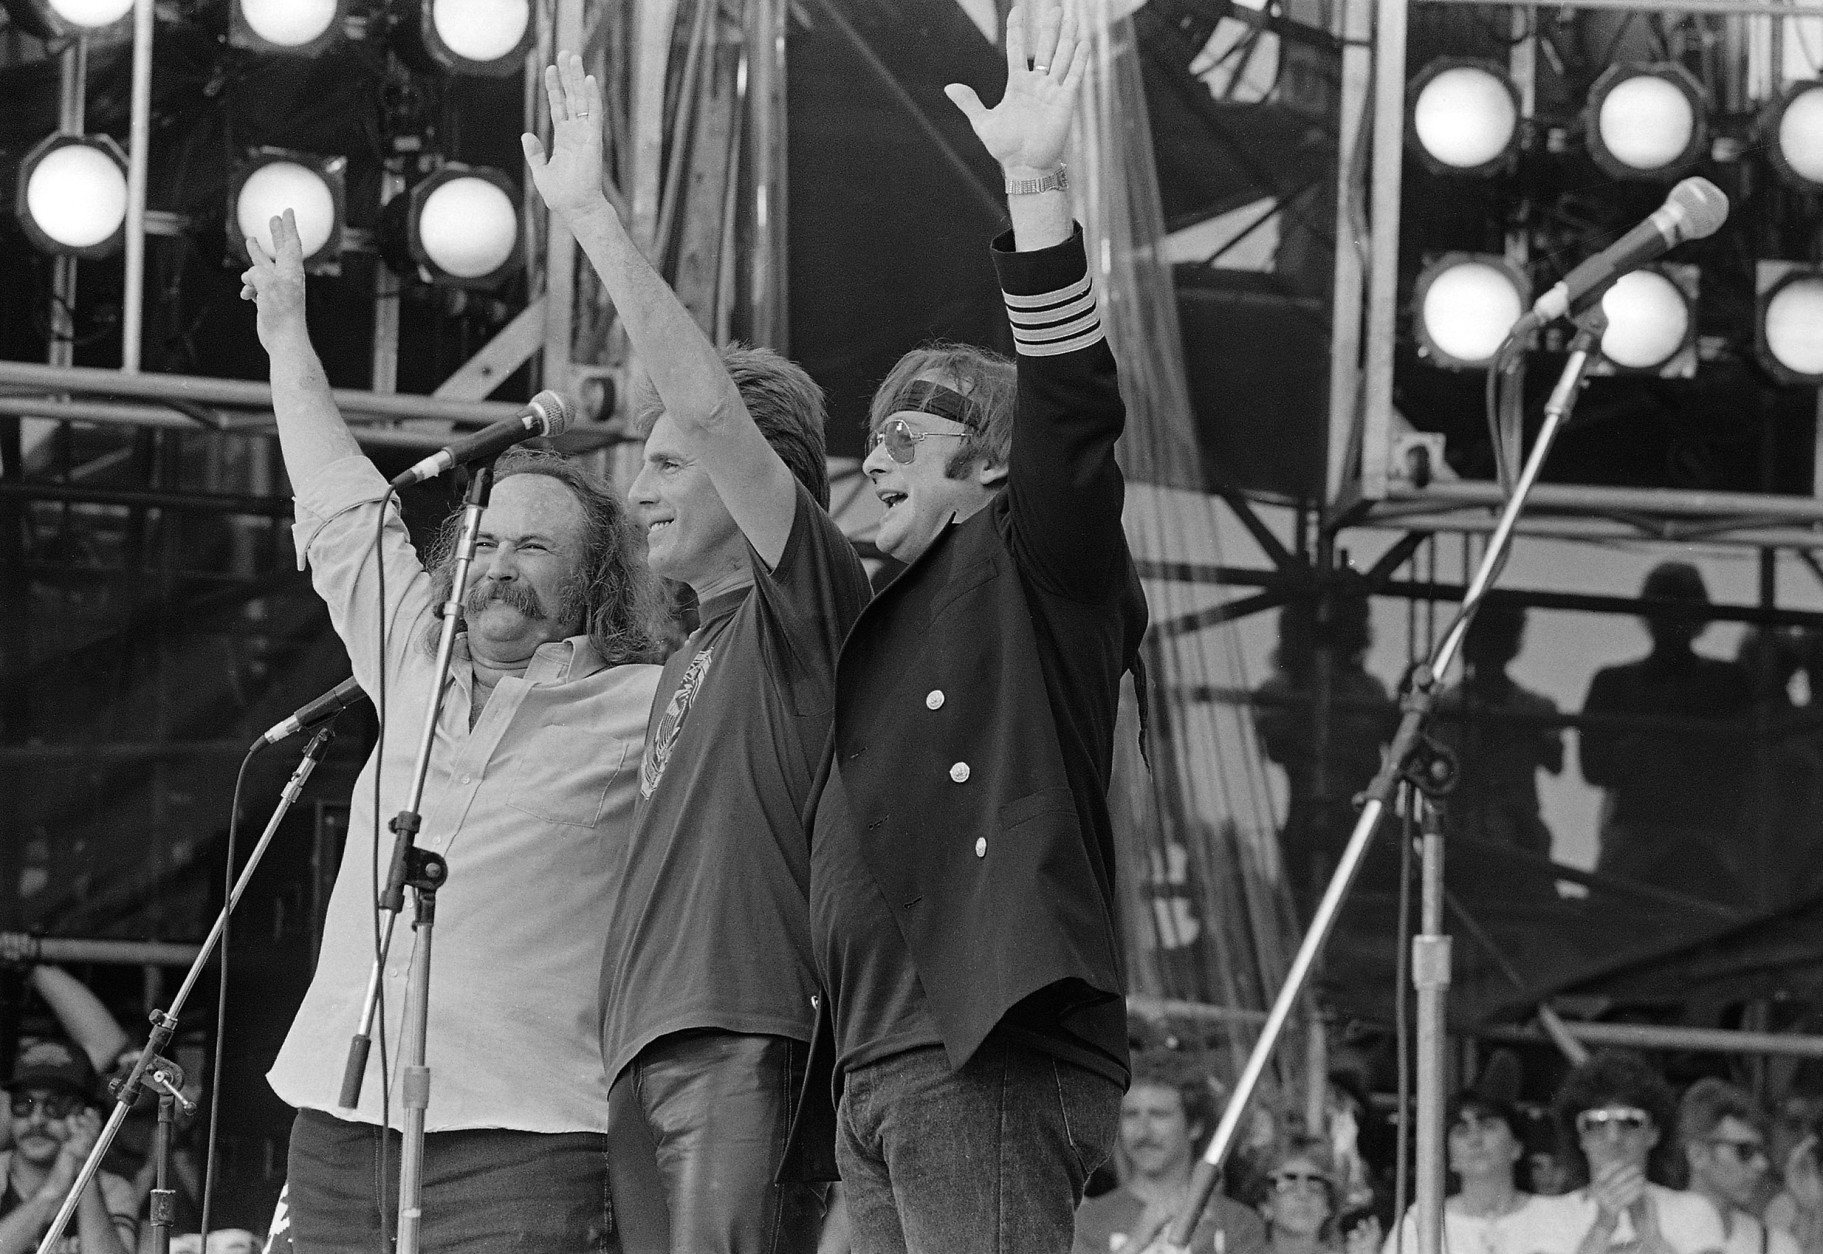 David Crosby, Graham Nash and Stephen Stills wave to the crowd during their Live Aid famine relief concert performance at JFK Stadium in Philadelphia, Pa. July 13, 1985. (AP Photo/Rusty Kennedy)